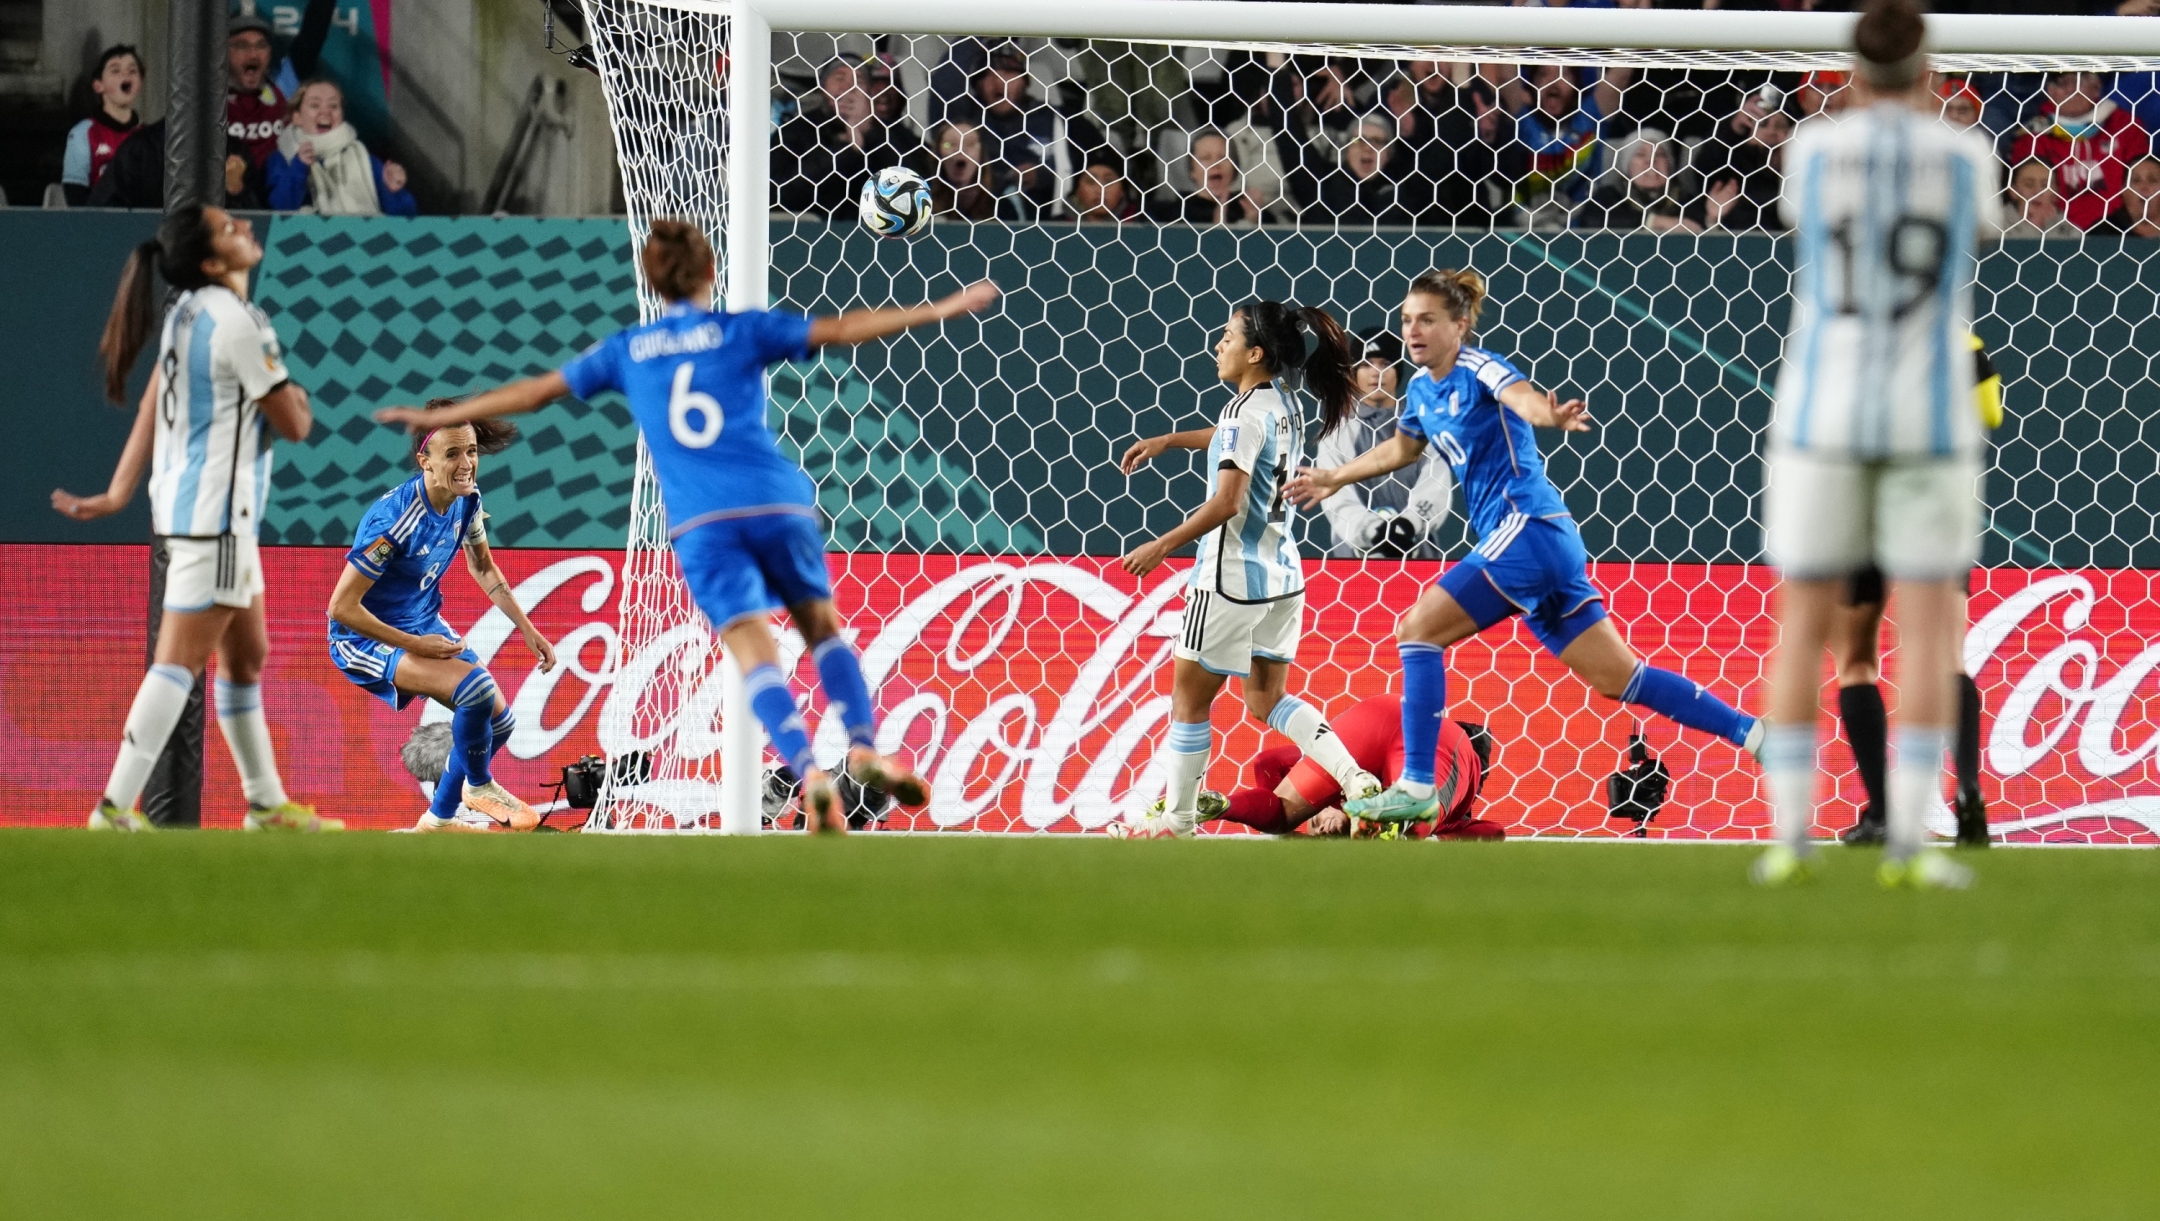 Italy's Cristiana Girelli, right, scores her side's first goal during the Women's World Cup Group G soccer match between Italy and Argentina at Eden Park in Auckland, New Zealand, Monday, July 24, 2023. (AP Photo/Abbie Parr)